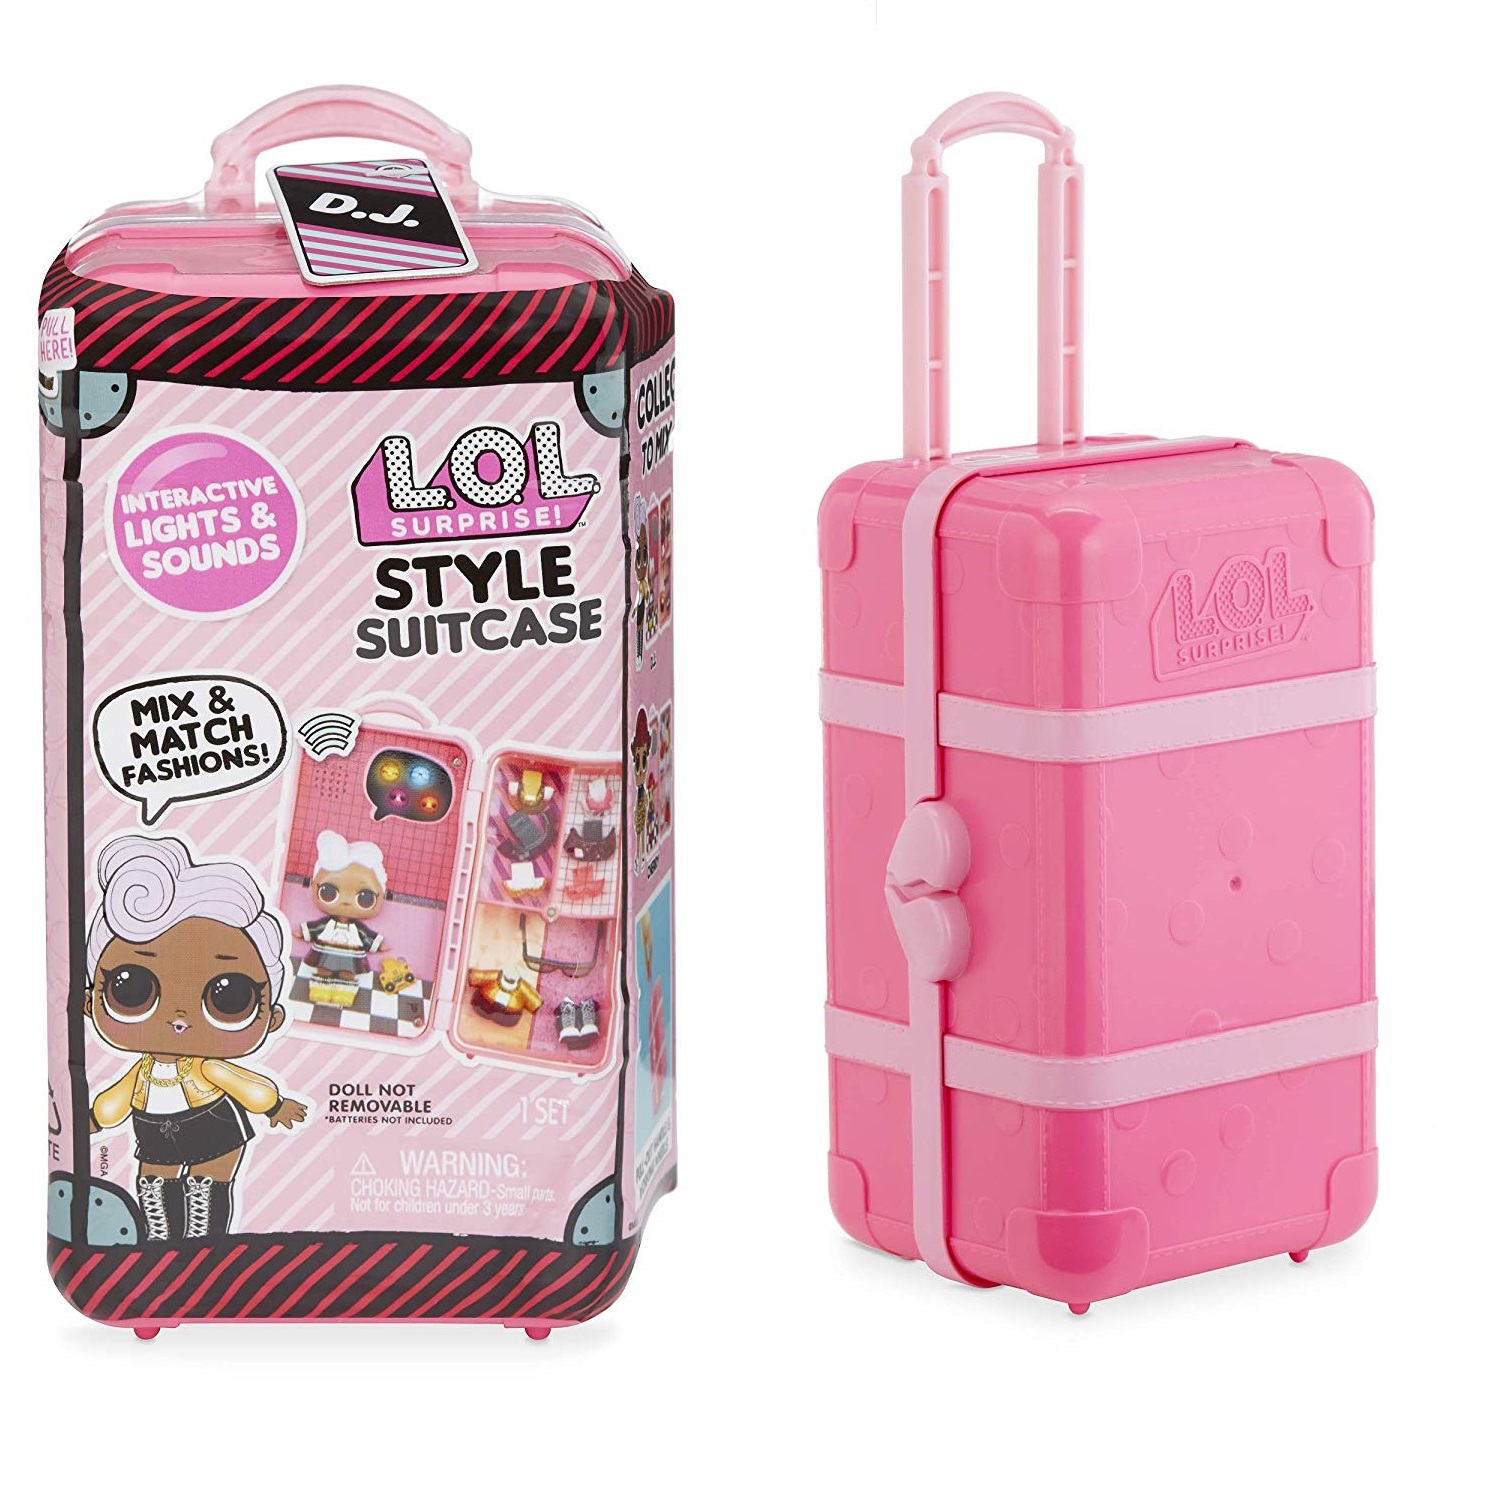 L O L Surprise Style Suitcase Series 1 Where To Buy Price